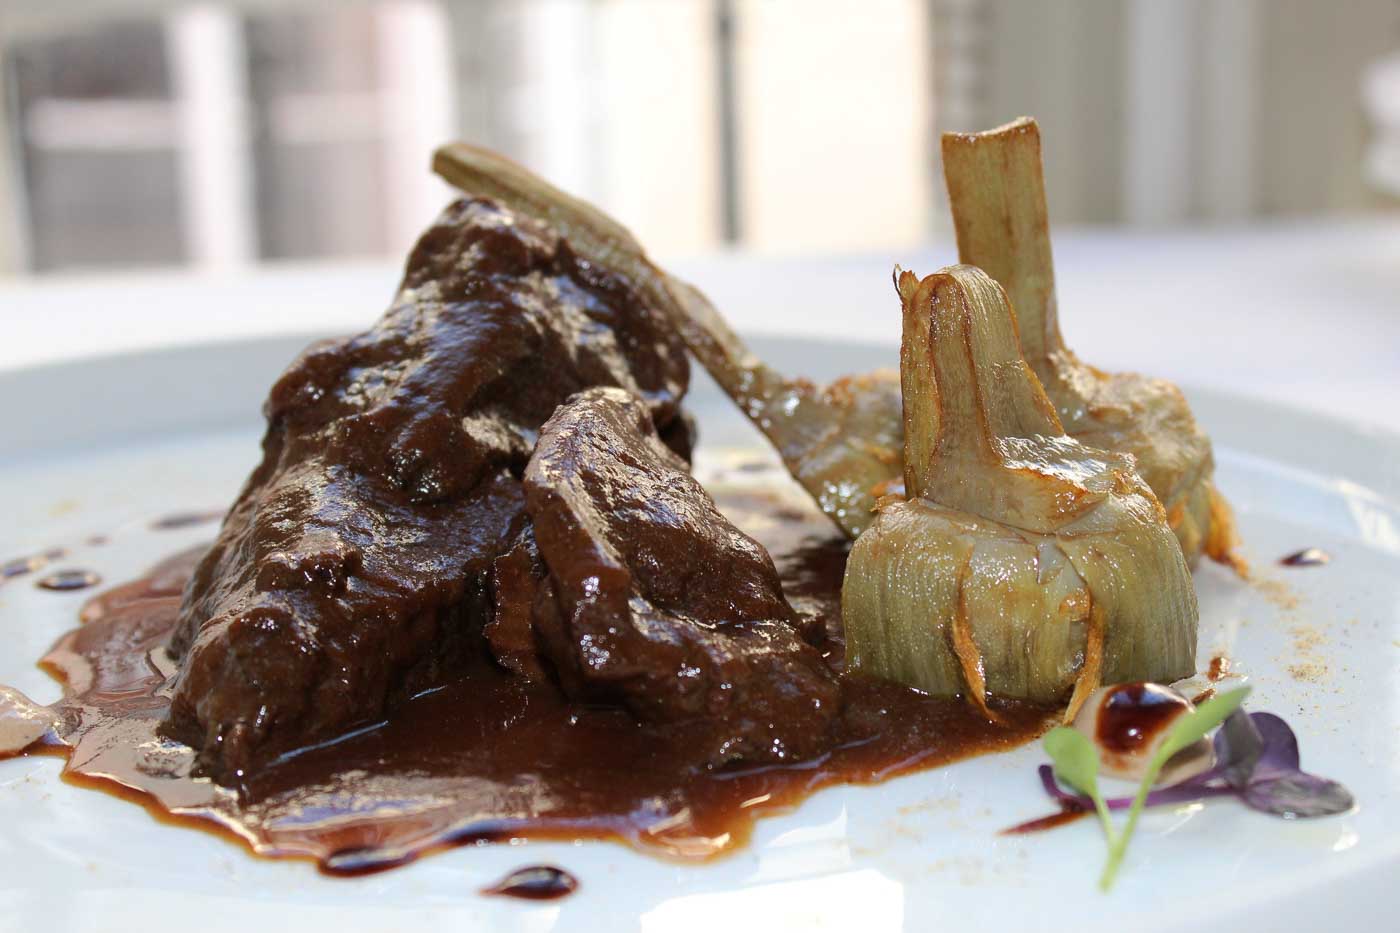 Beef cheeks with Licorice and artichokes